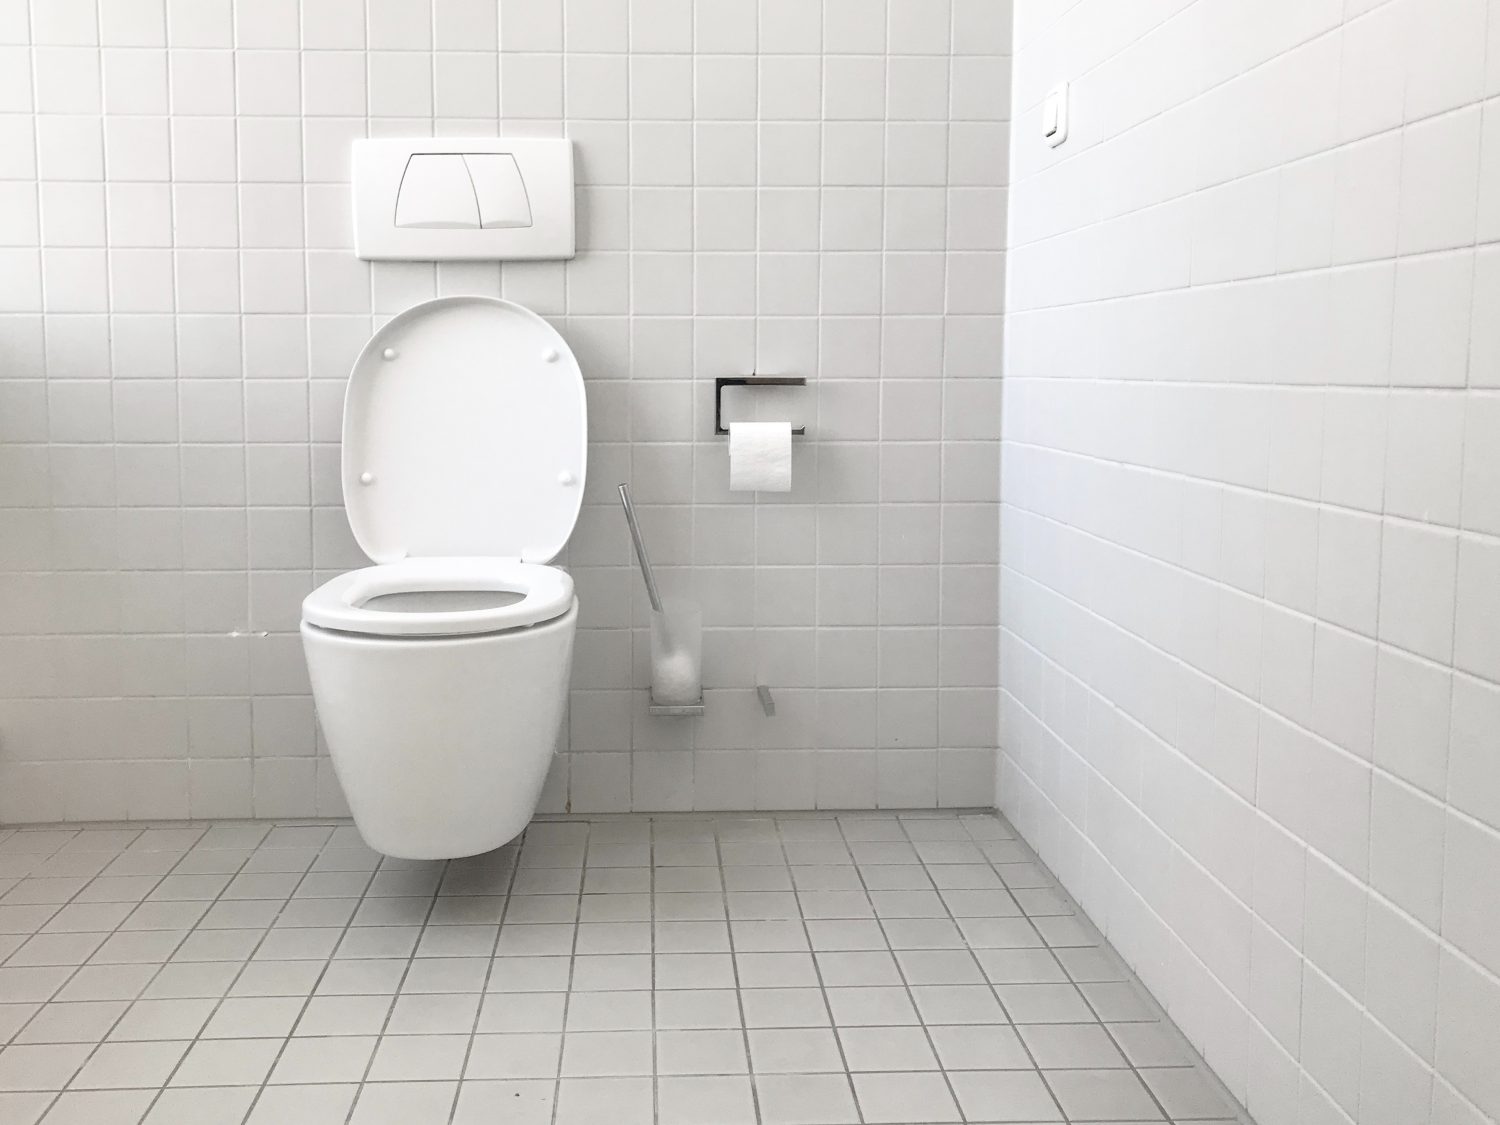 How to Fix a Bubbling Toilet